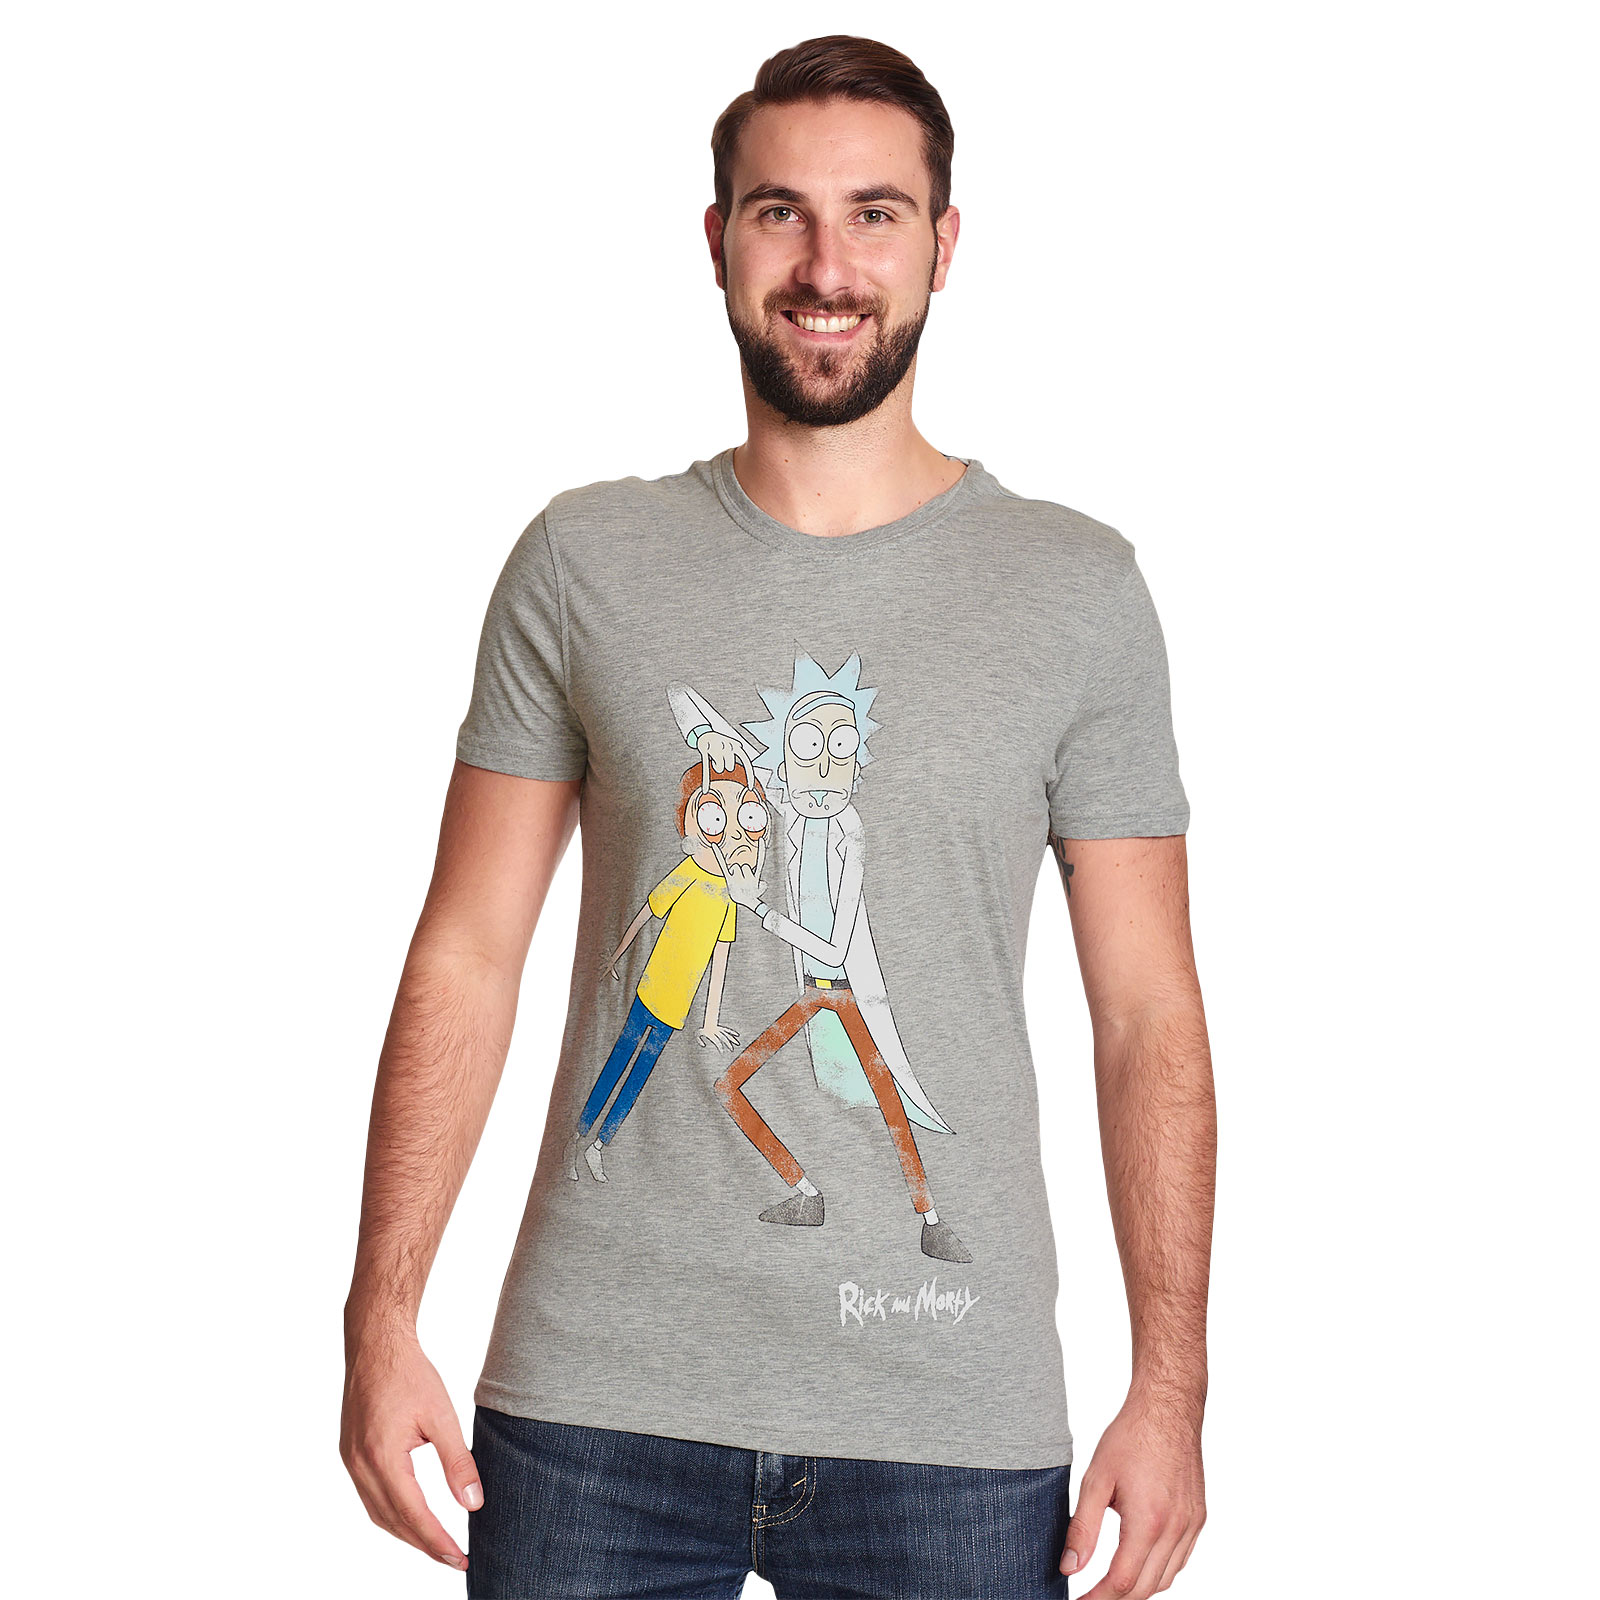 Rick and Morty - Morty Eye Edit Distressed T-Shirt grijs